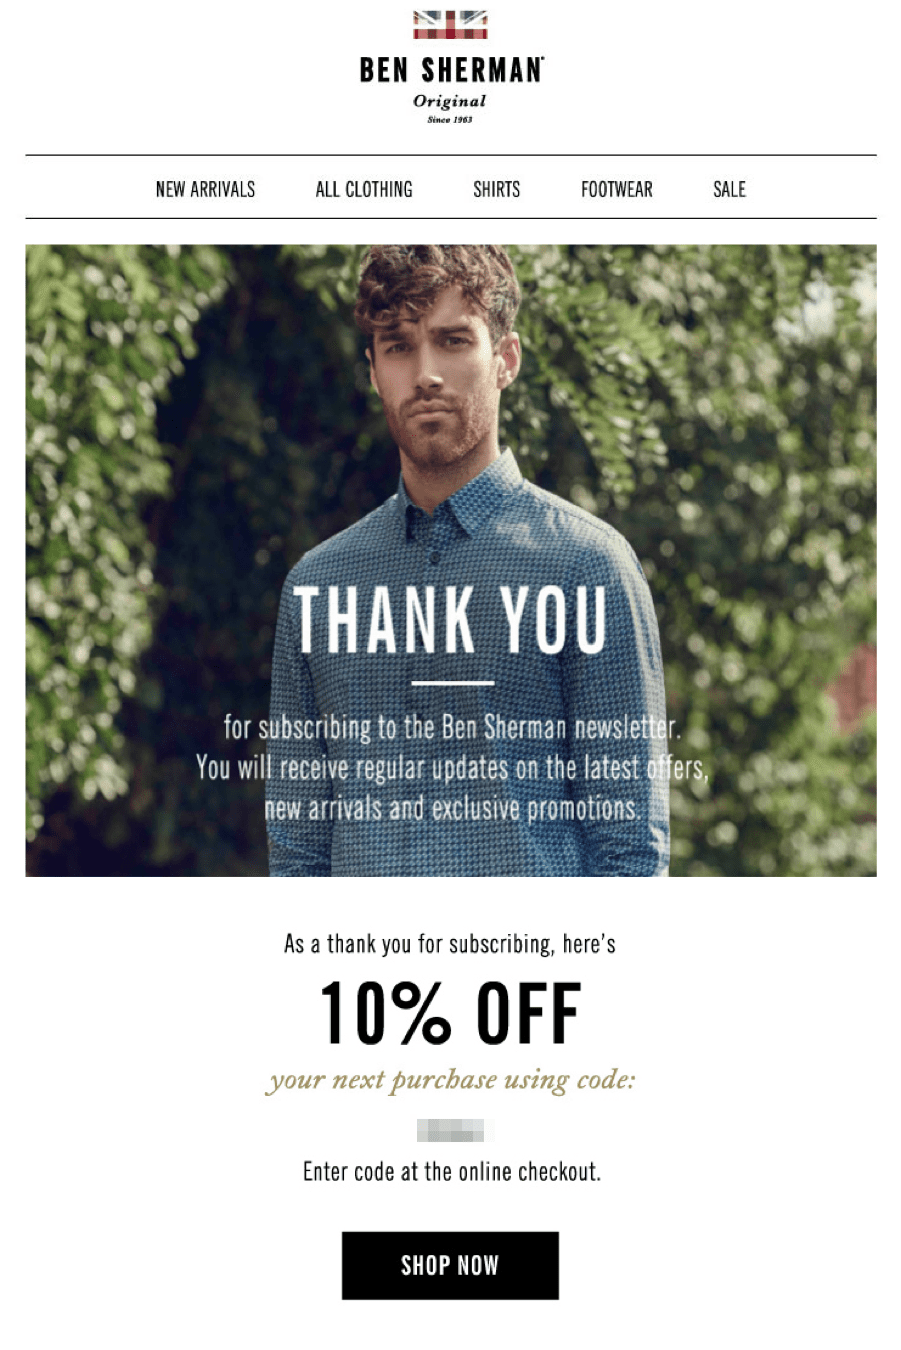 Ben Sherman welcome email